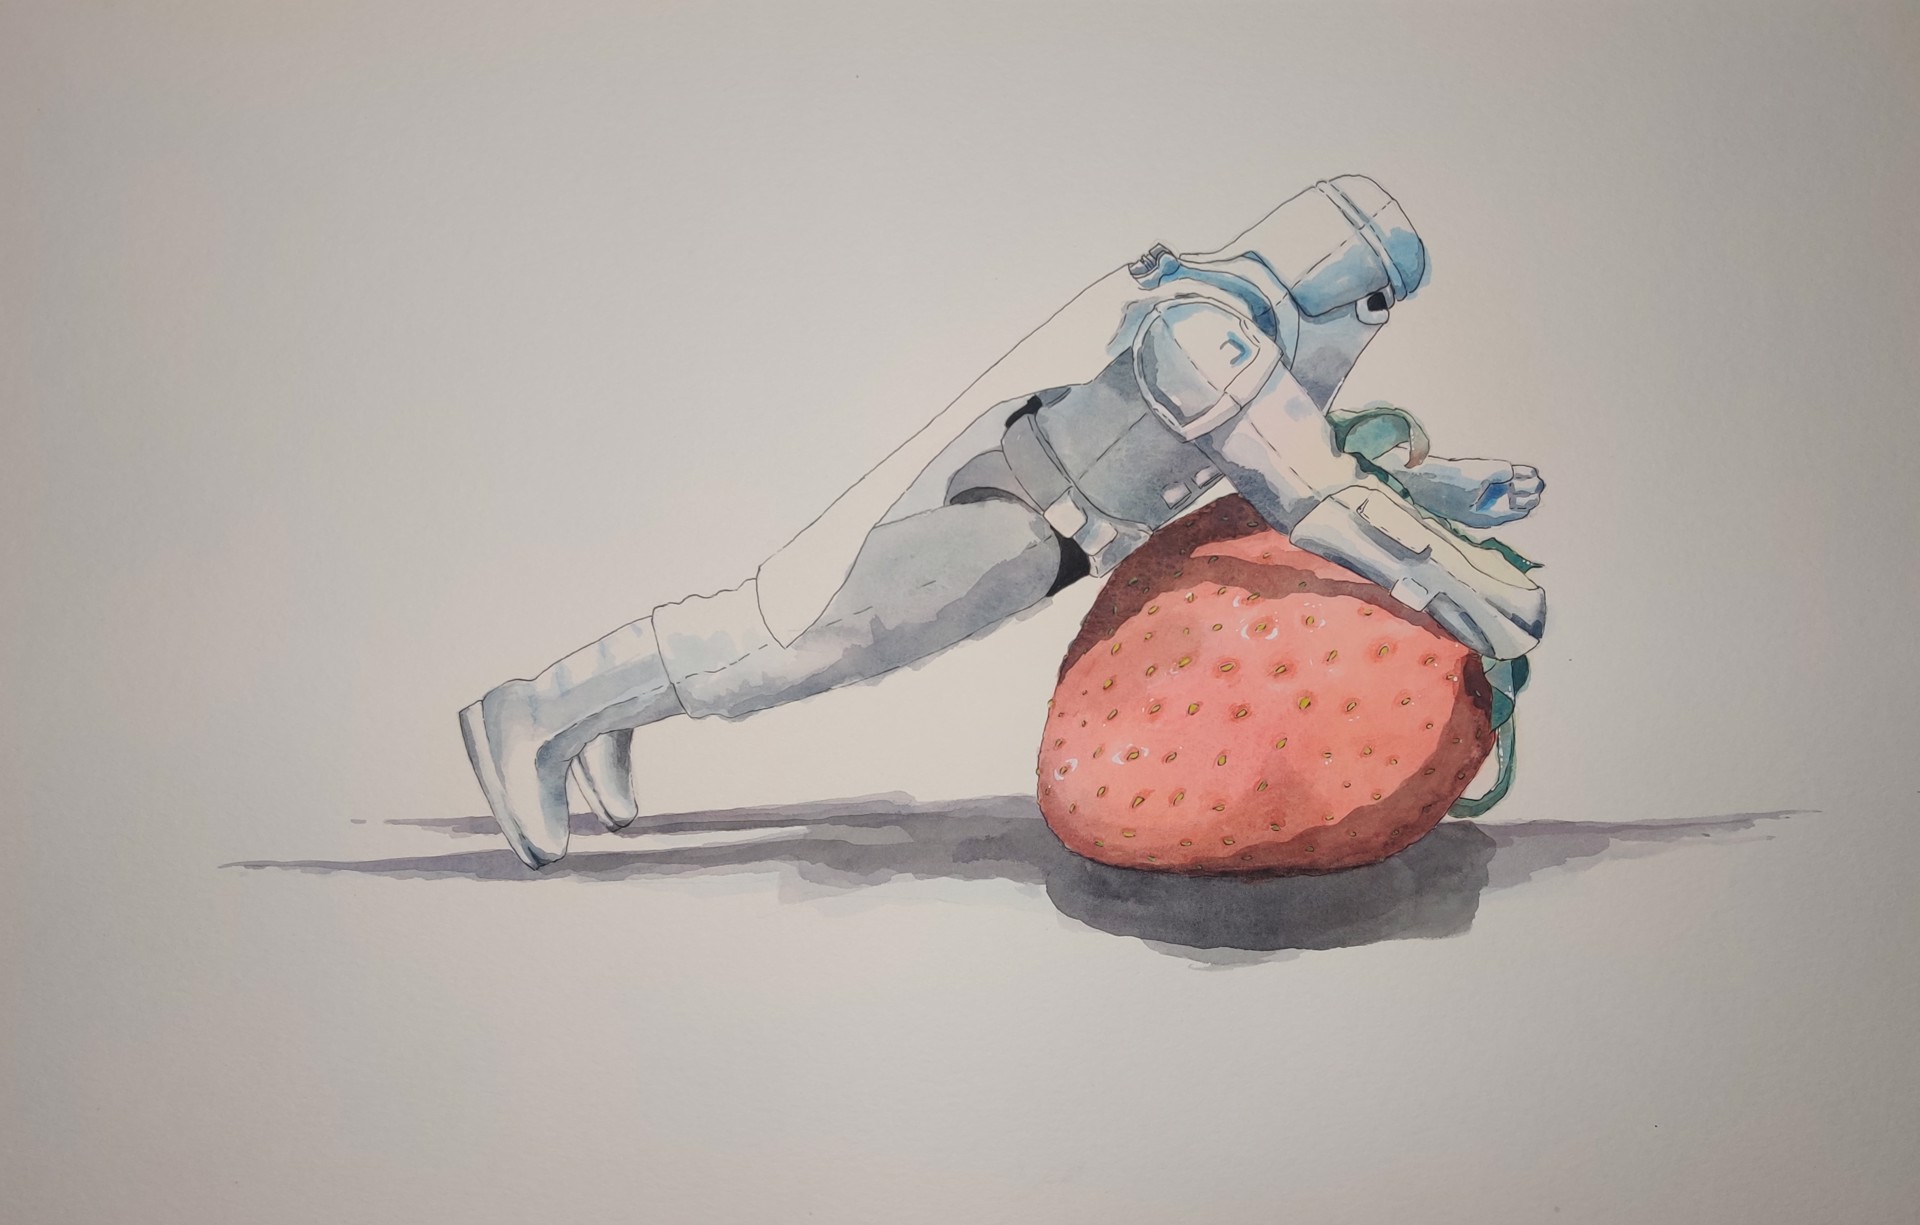 Snowtrooper and His Strawberry by Nathaniel Gutierrez